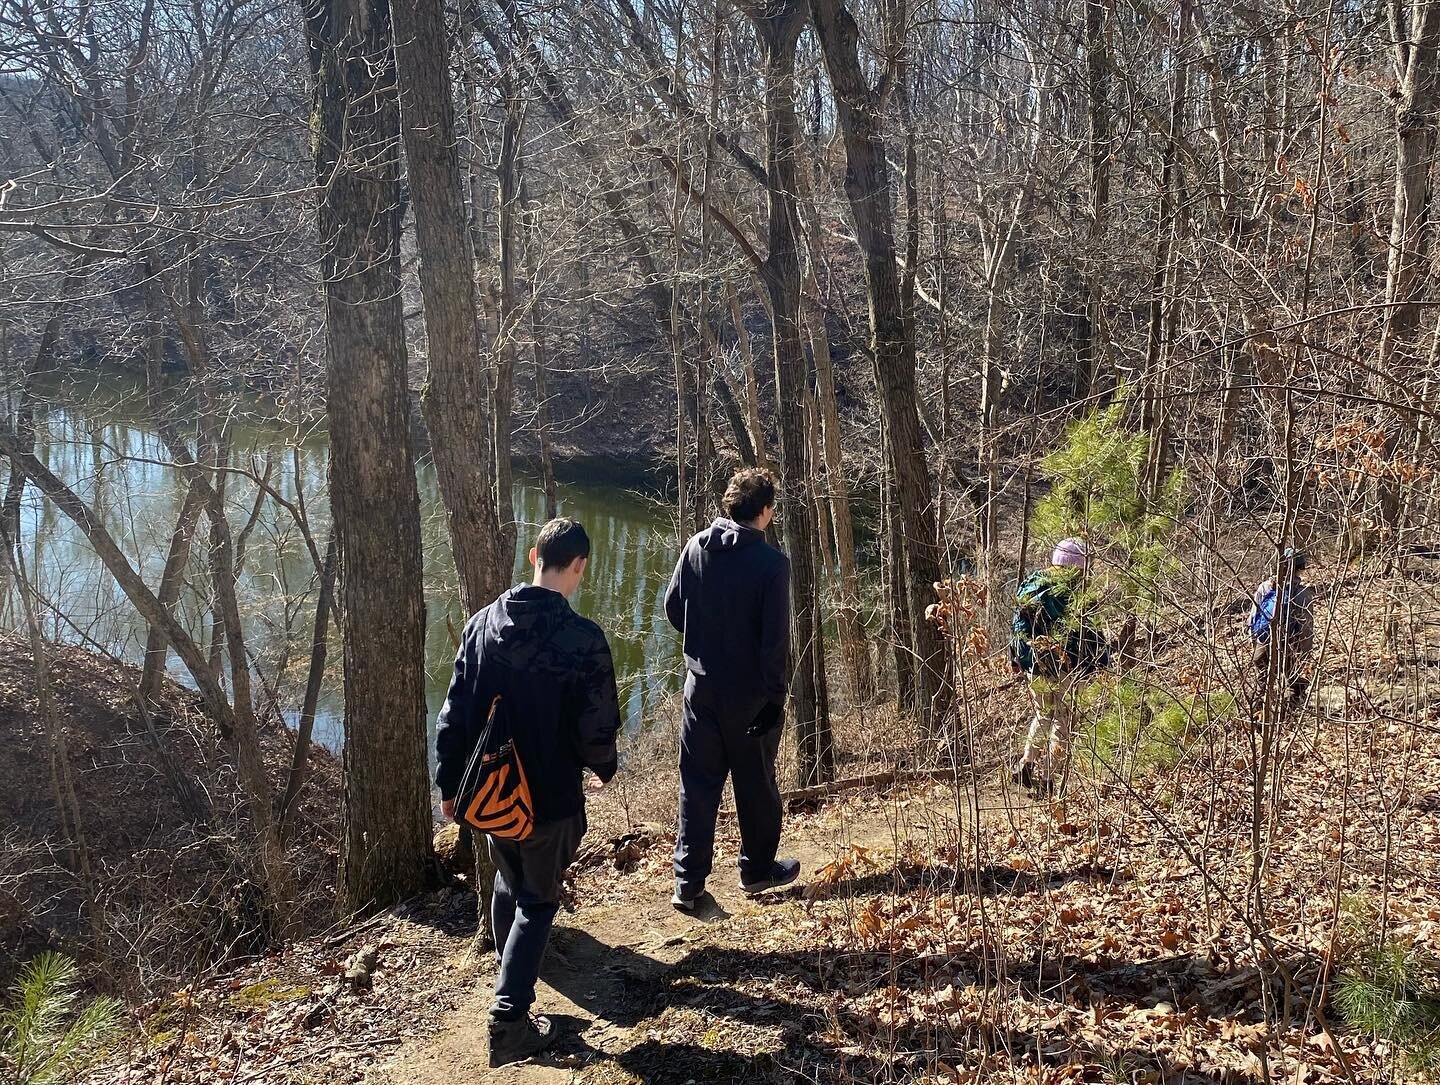 Combat those sunday scaries by taking a look at this rad weekend recap. Members enjoyed the spring-like weather at Martell Forest and Turkey Run!!